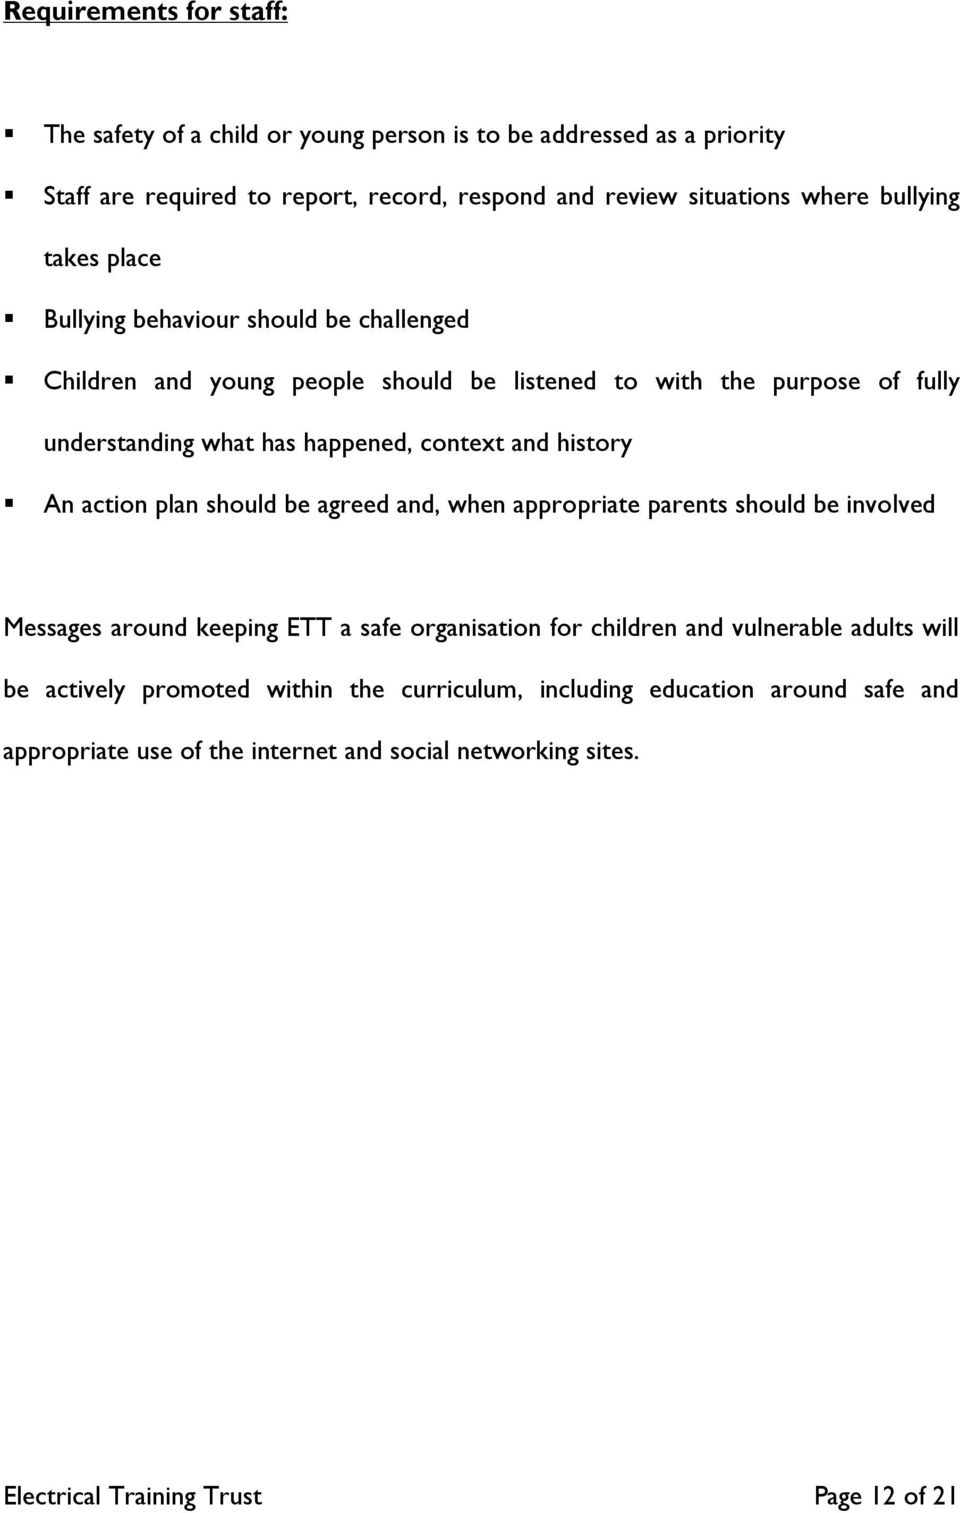 and history An action plan should be agreed and, when appropriate parents should be involved Messages around keeping ETT a safe organisation for children and vulnerable adults